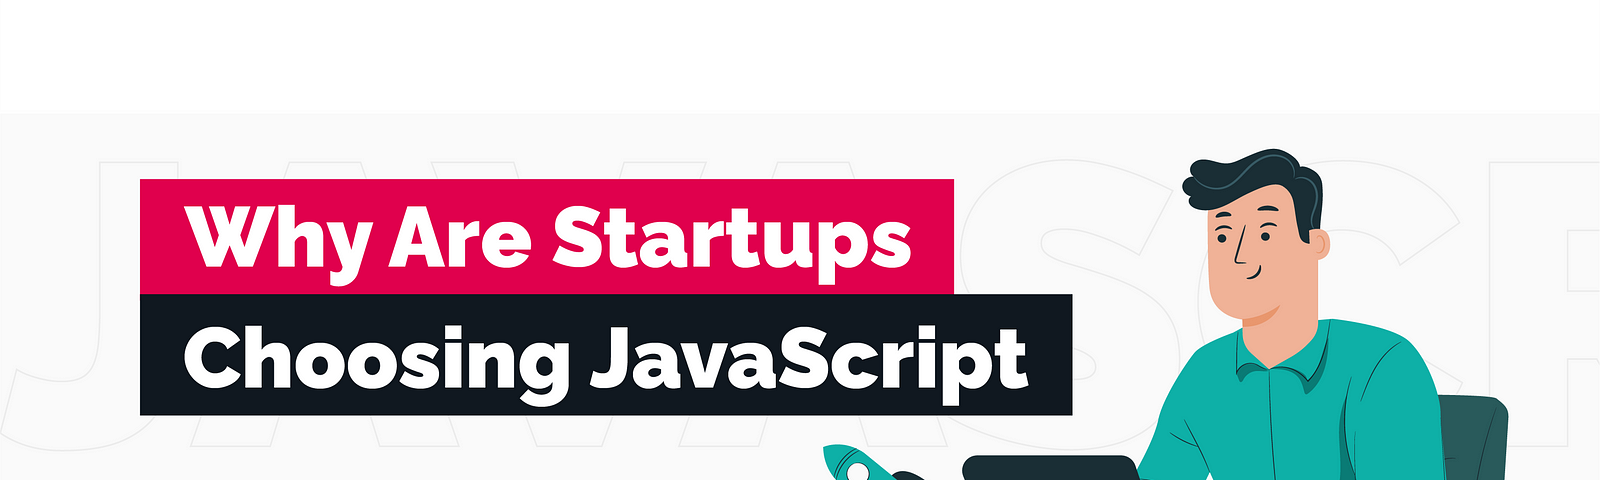 Why do Seed and Series A Startups Choose JavaScript for Frontend and Backend? | TechMagic.co